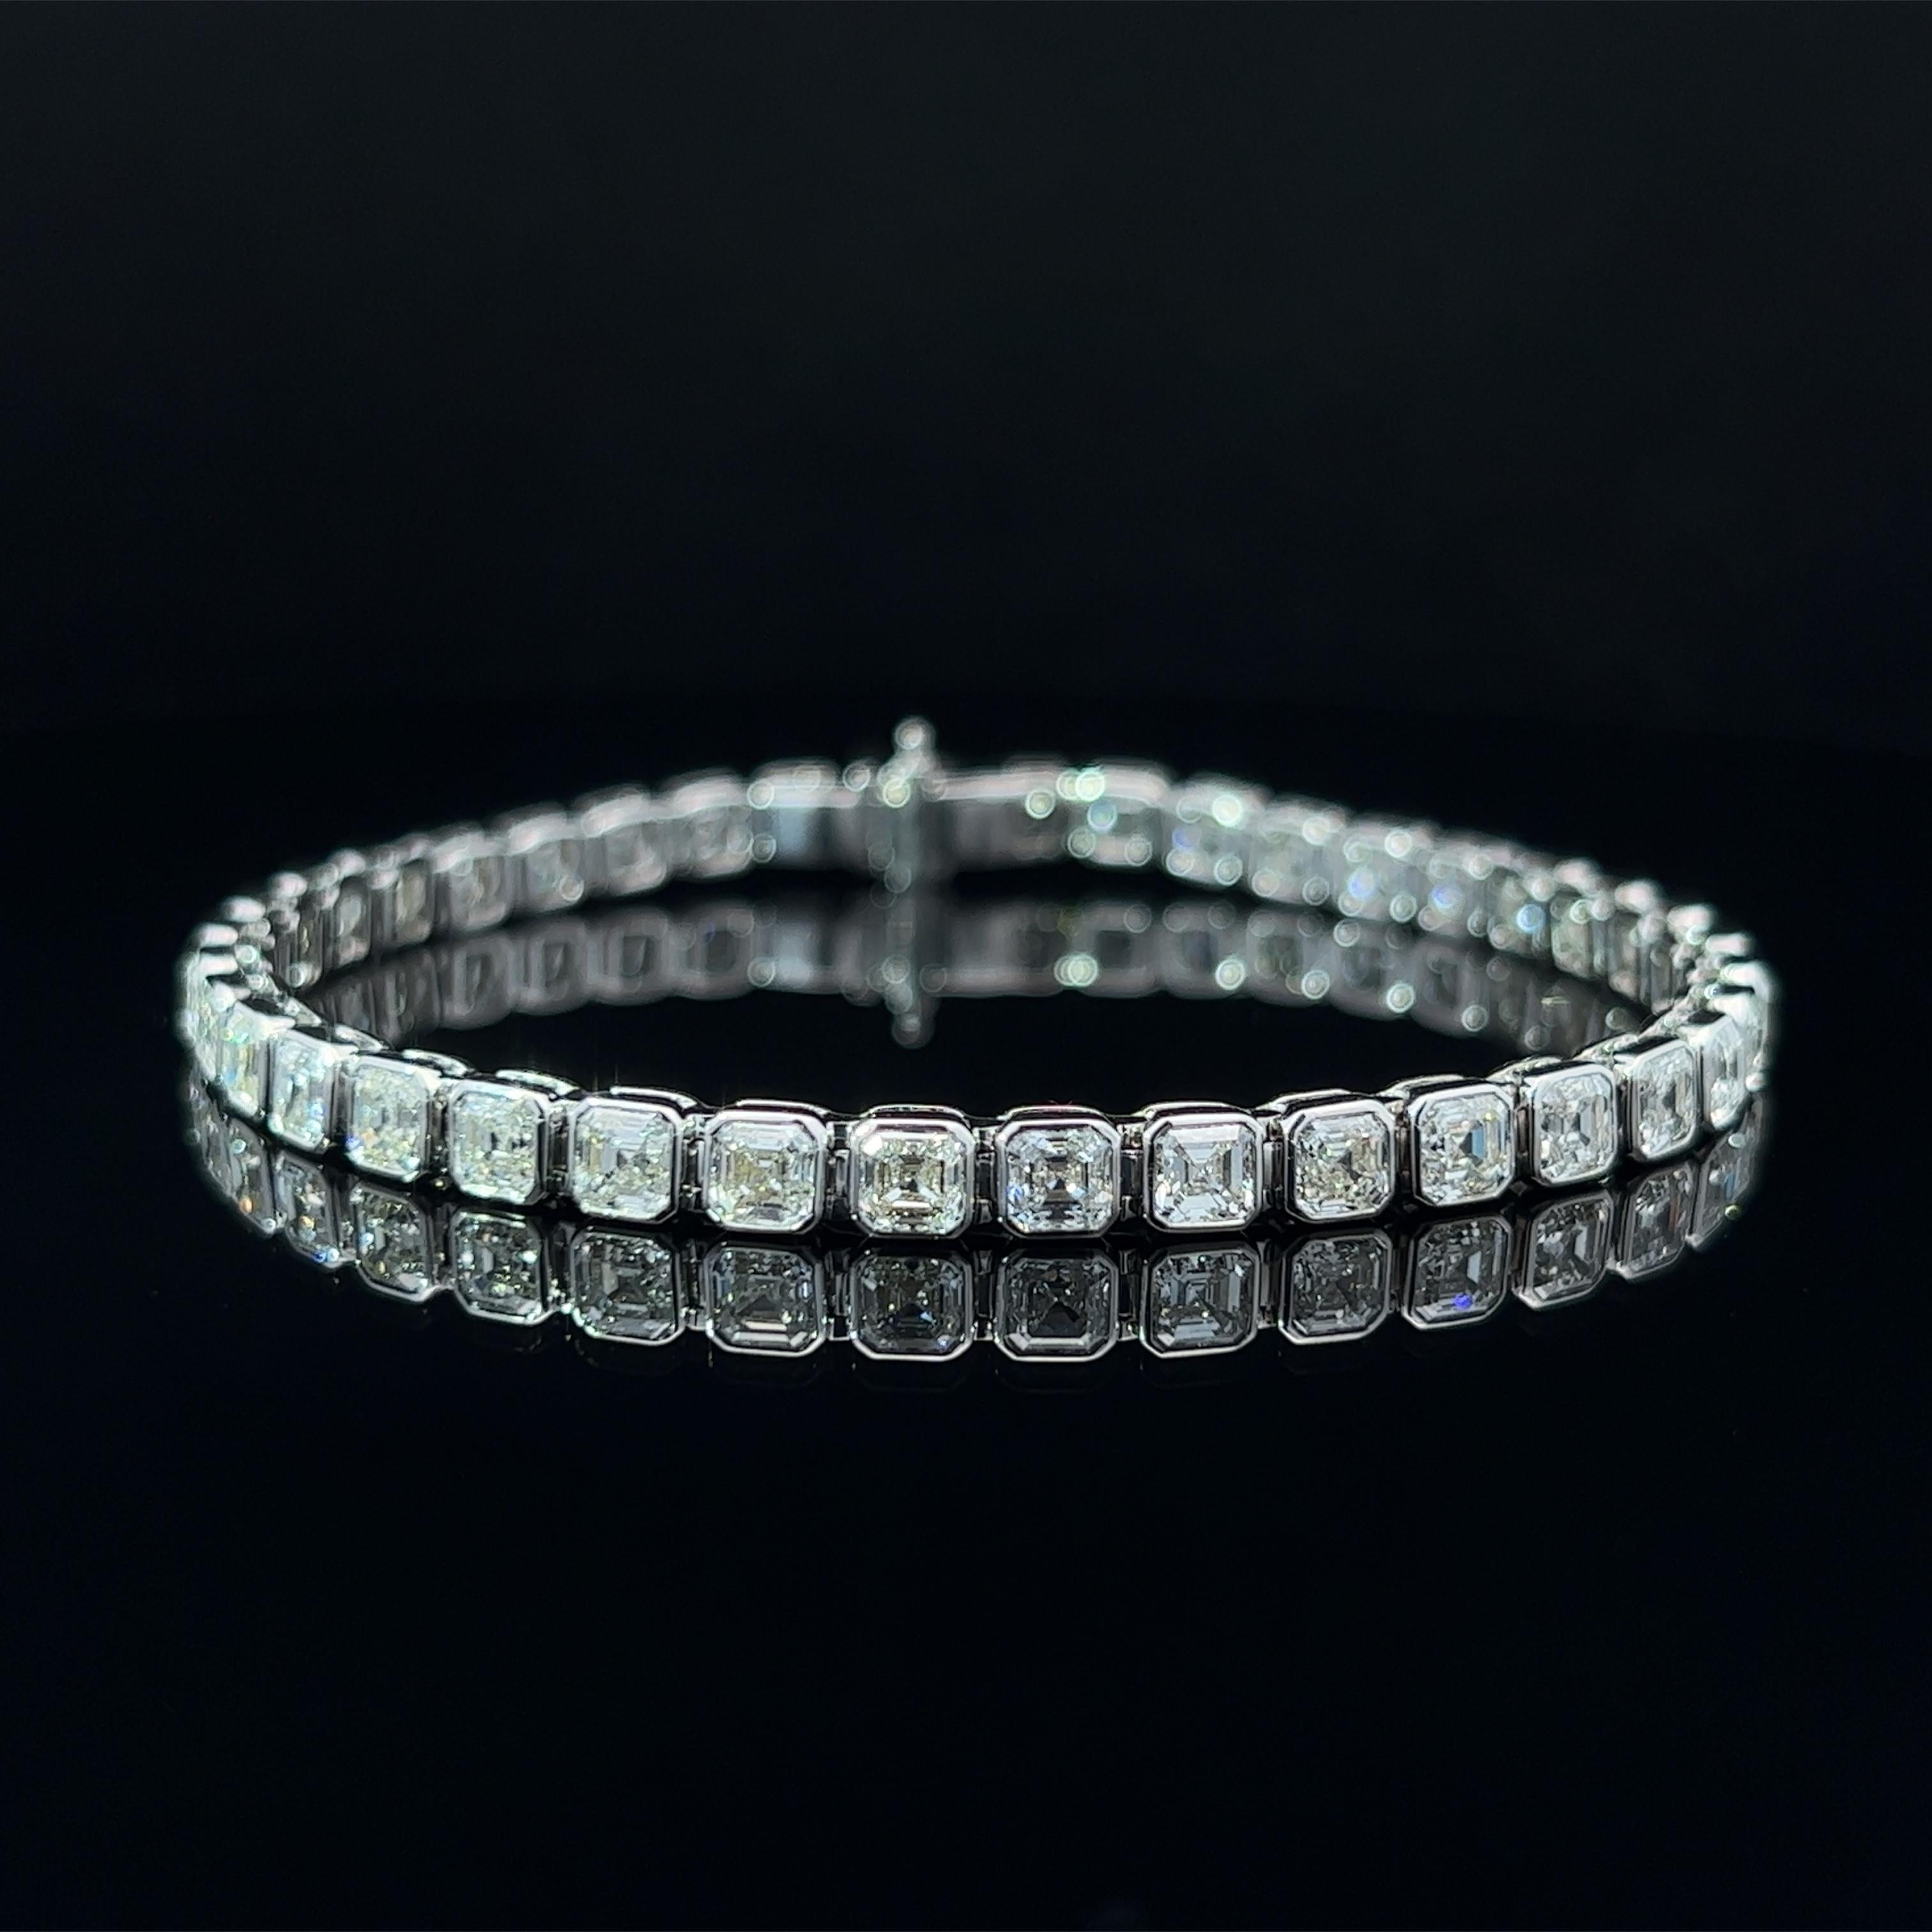 Key Features:

Diamond Shape: Asscher (Square Emerald)
Total Diamond Weight: 9.34ct 
Individual Diamond Weight: .25ct
Color/Clarity: FG VVS
Metal: 18K White Gold
Metal Weight: 14.33g

Asscher-Cut Diamond: The centerpiece of this bracelet is a